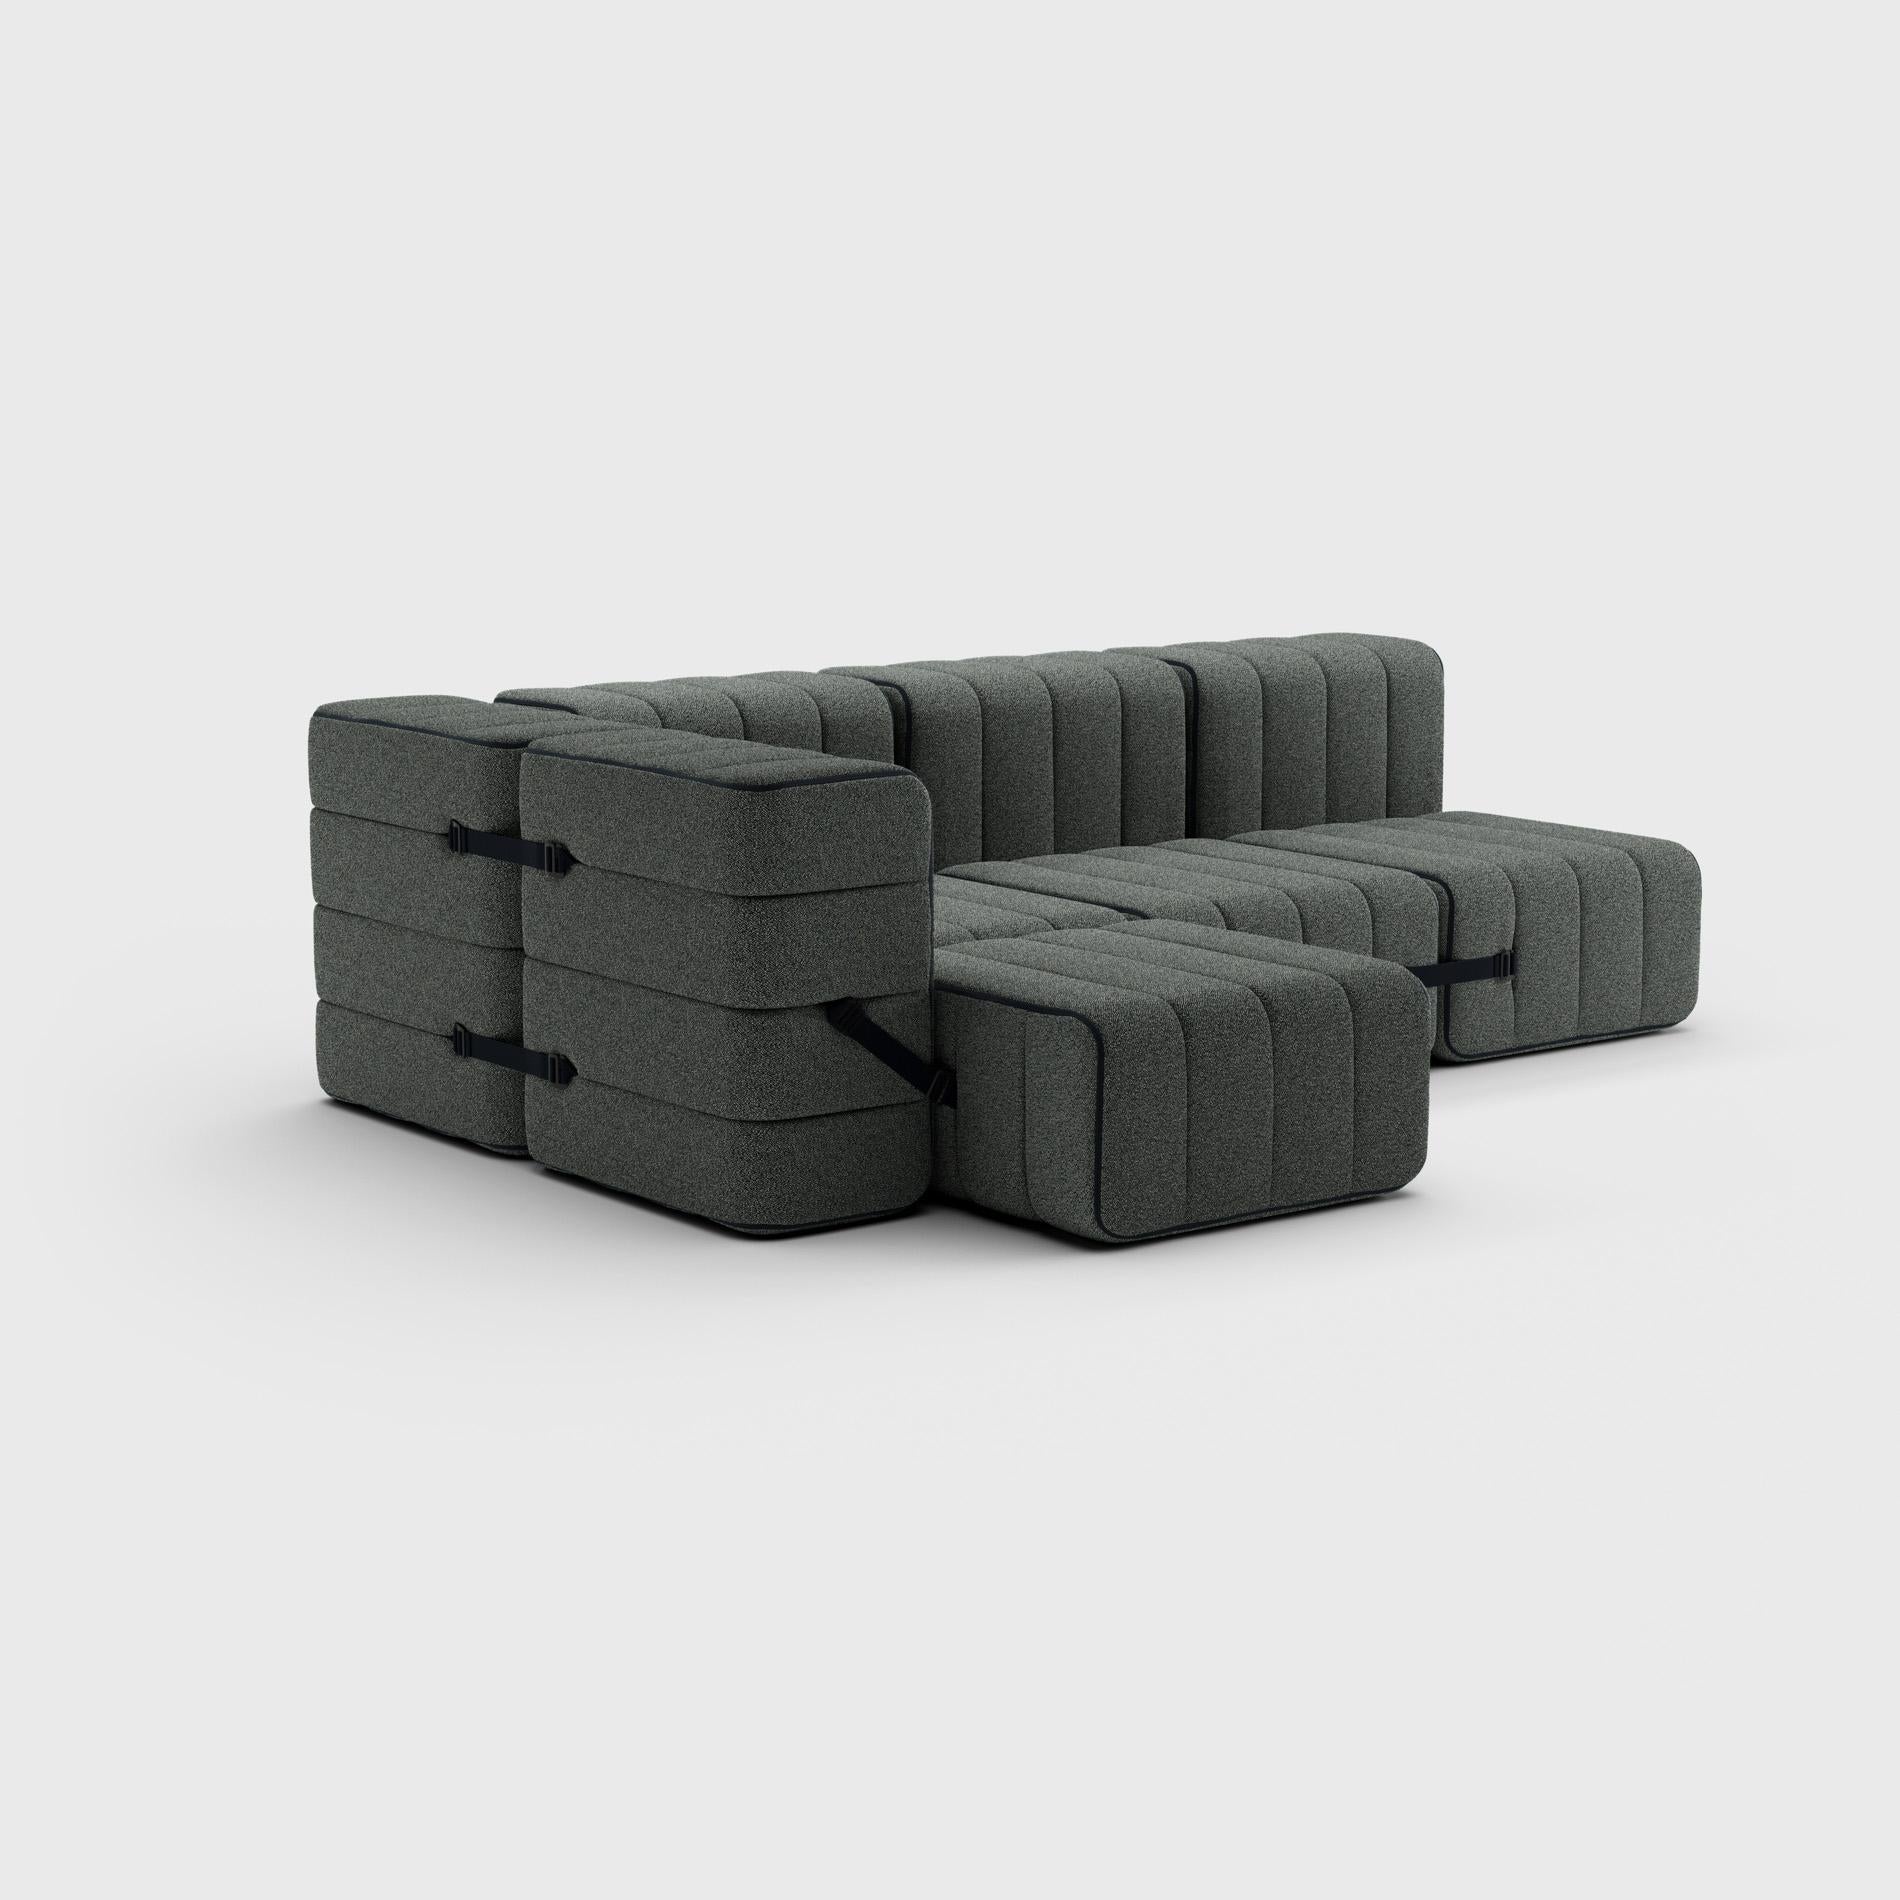 Curt Single Module, Fabric Sera 'Gravel Grey', Curt Modular Sofa System In New Condition For Sale In Berlin, BE